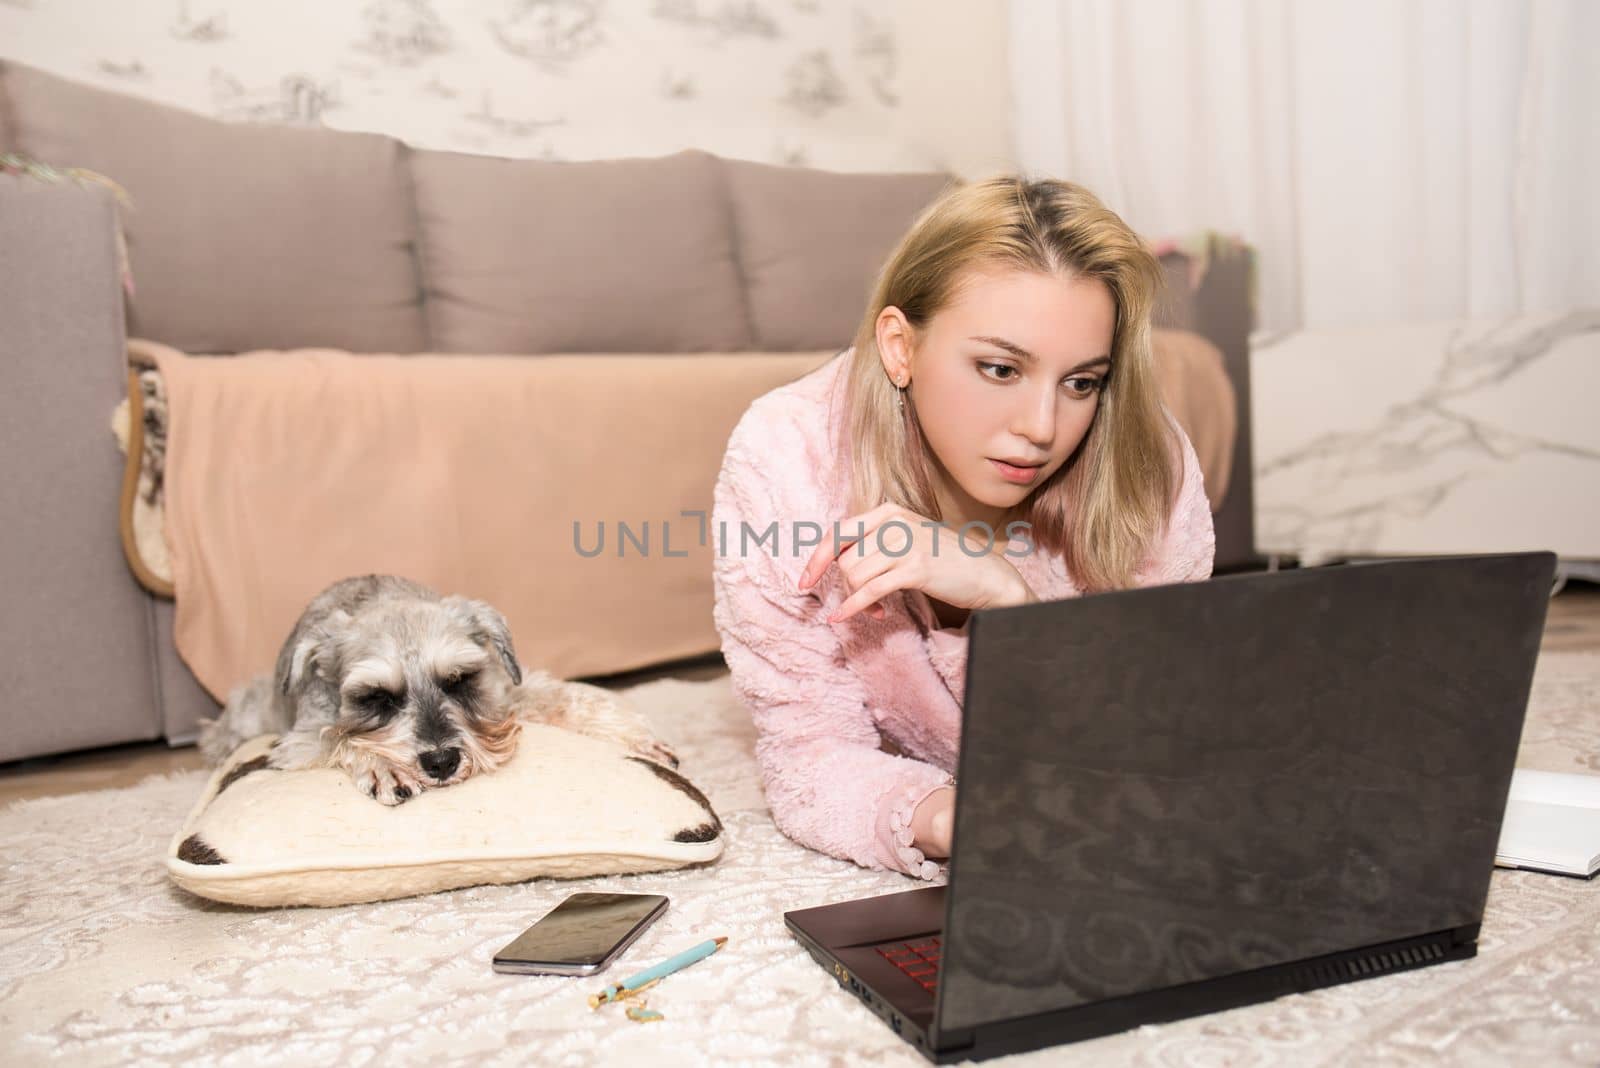 Young woman is working on a laptop, a gray dog is lying on the carpet next to her. by Nickstock